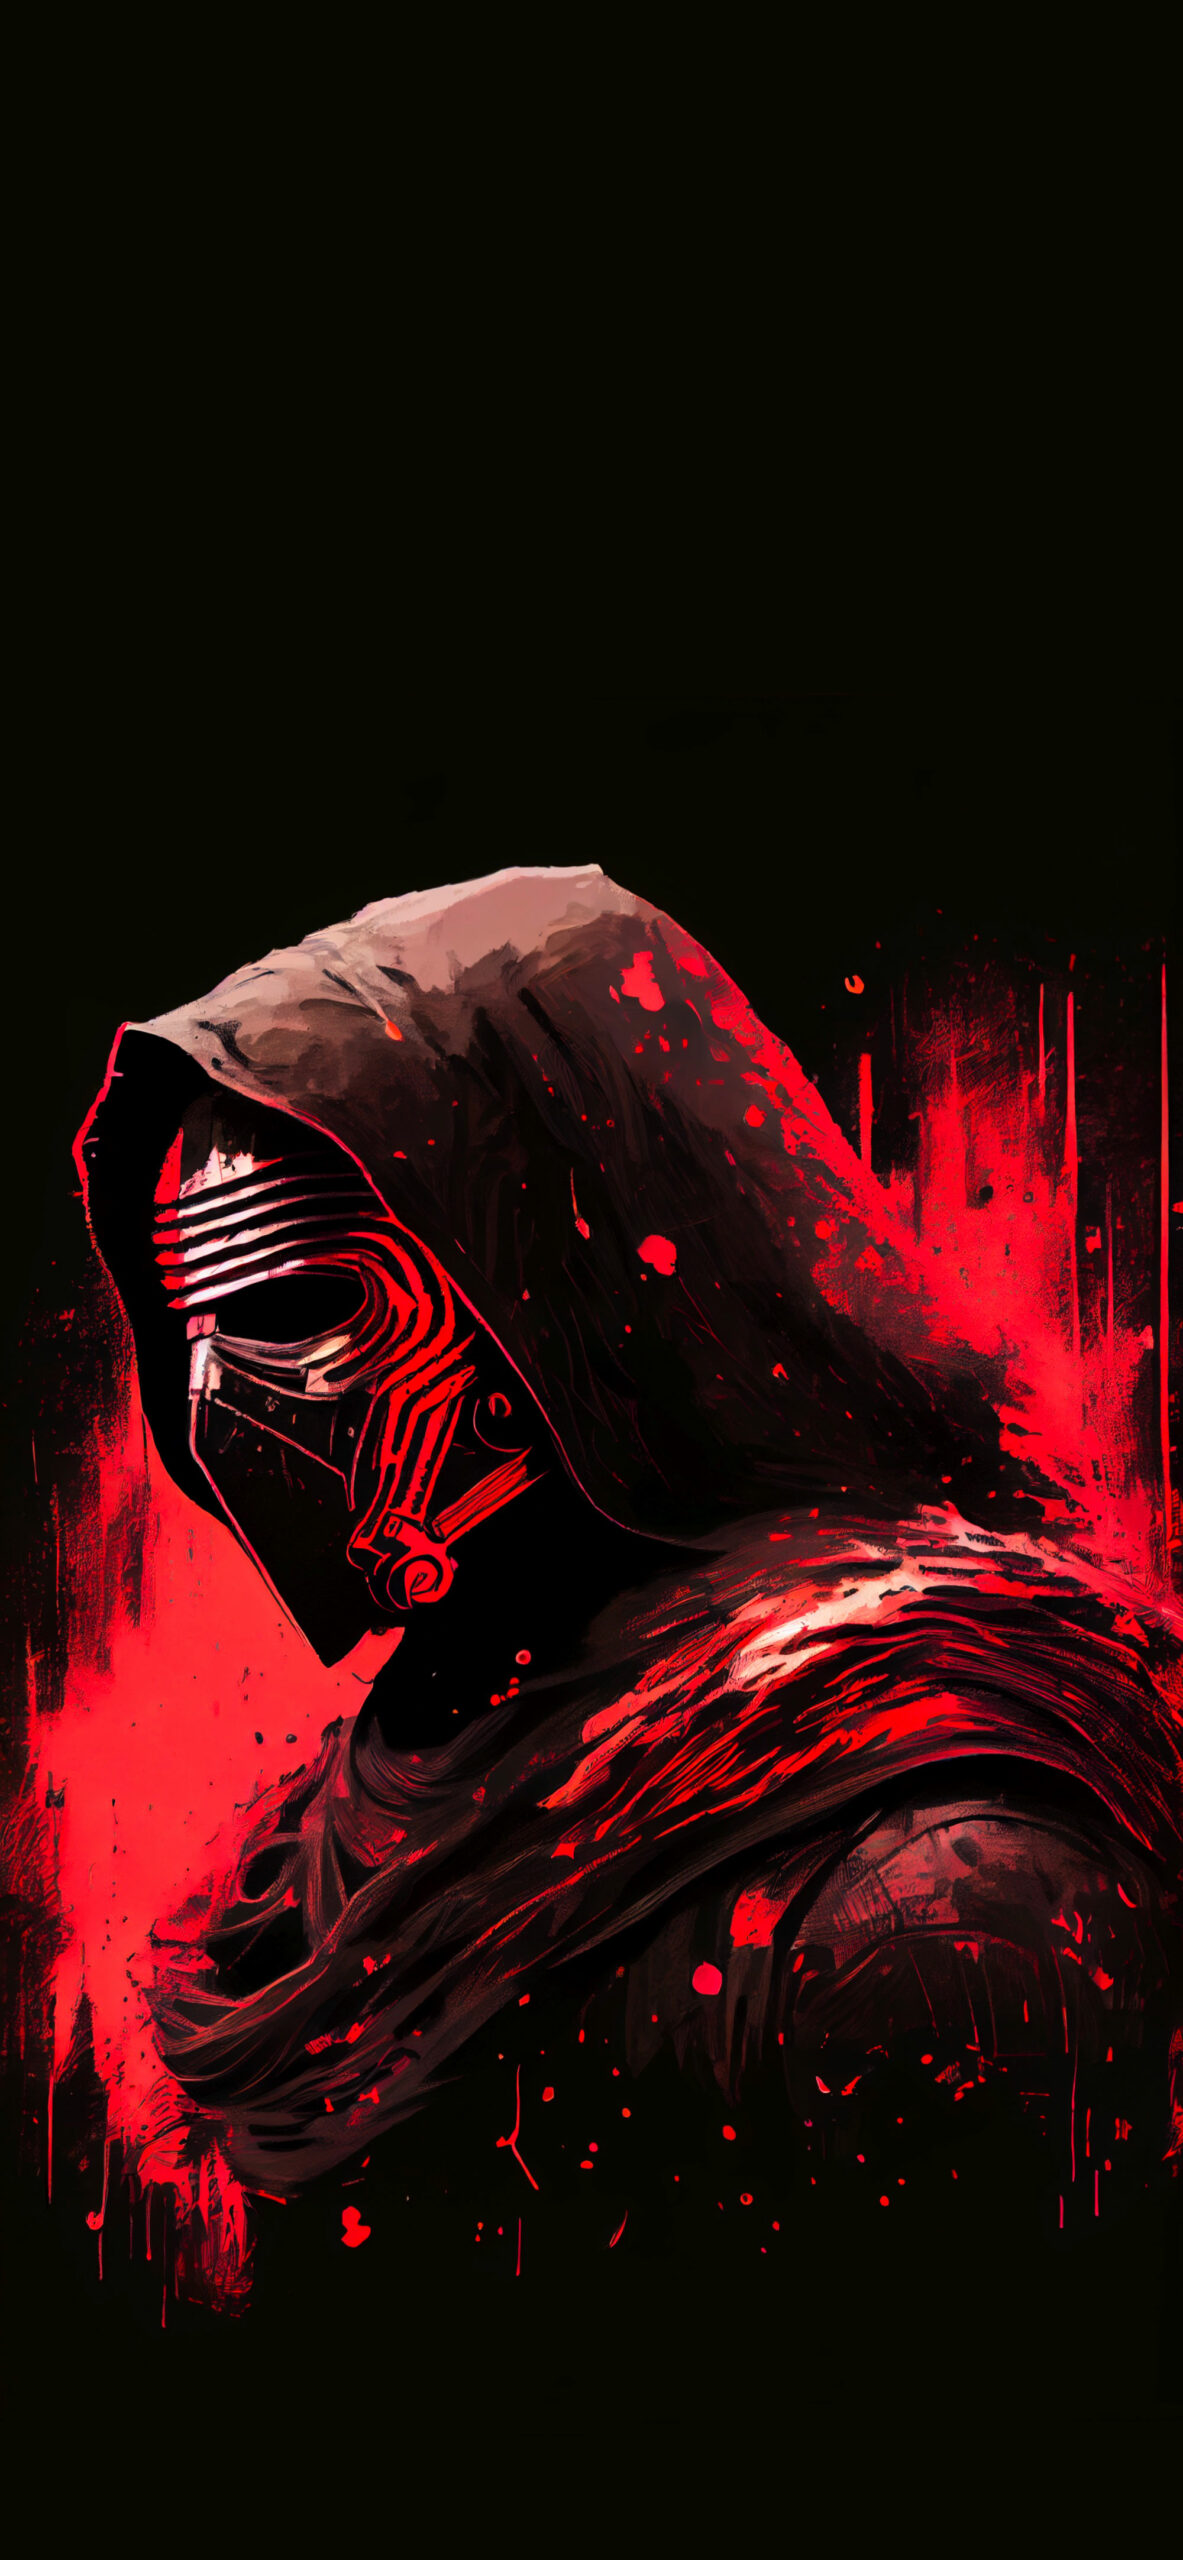 Star Wars Kylo Ren Black and Red Wallpapers - Wallpapers Clan